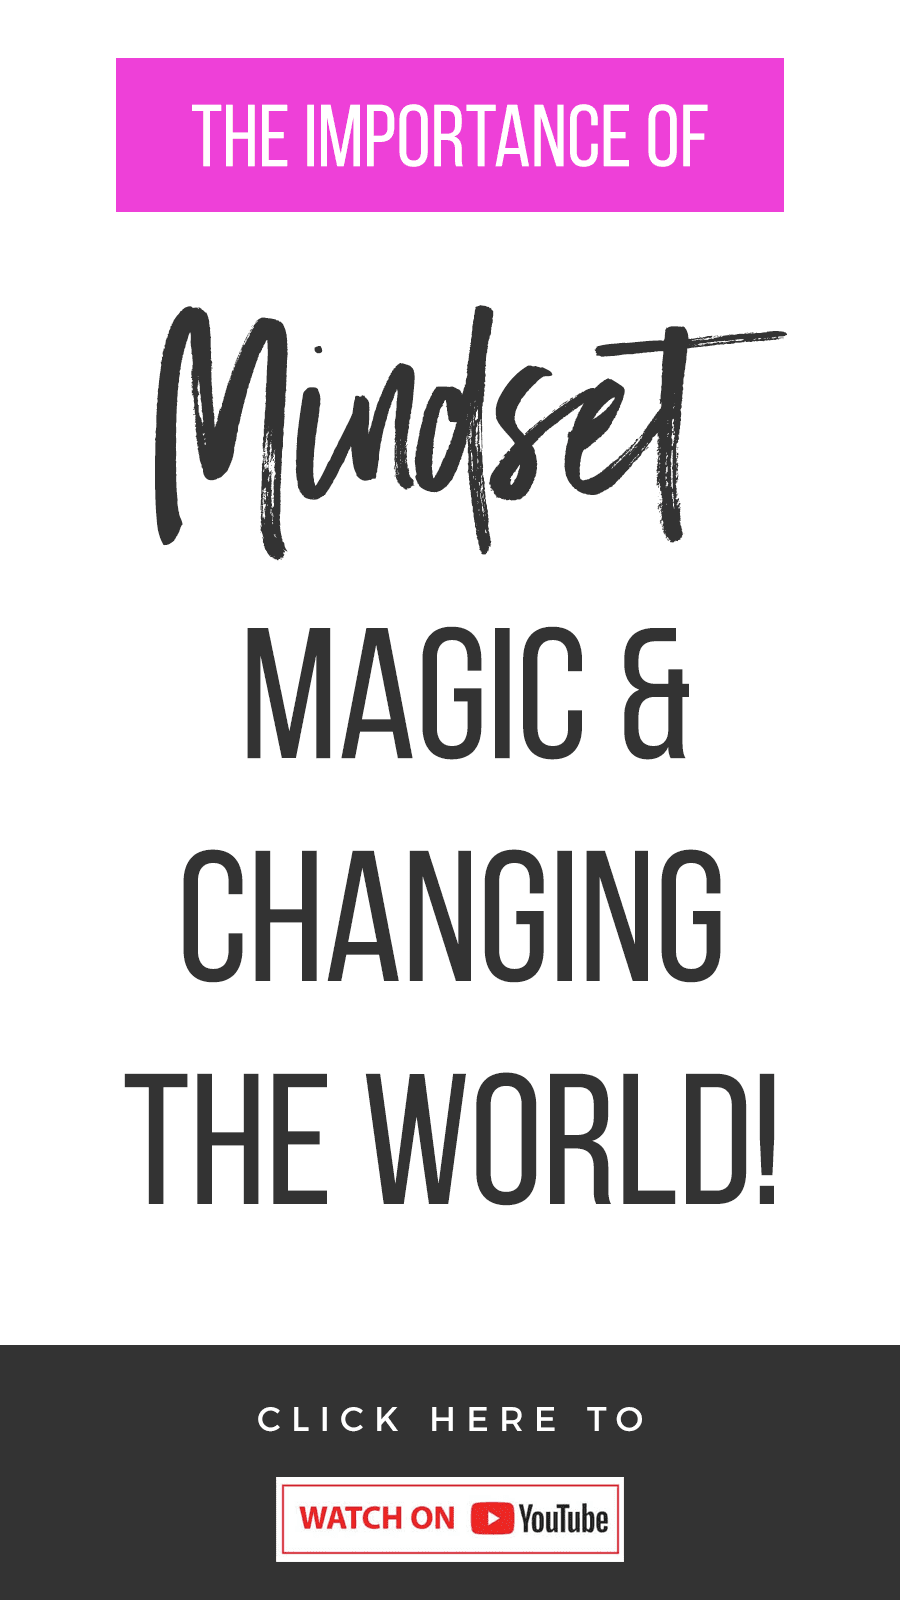 The Importance of Mindset, Magic & Changing The World!